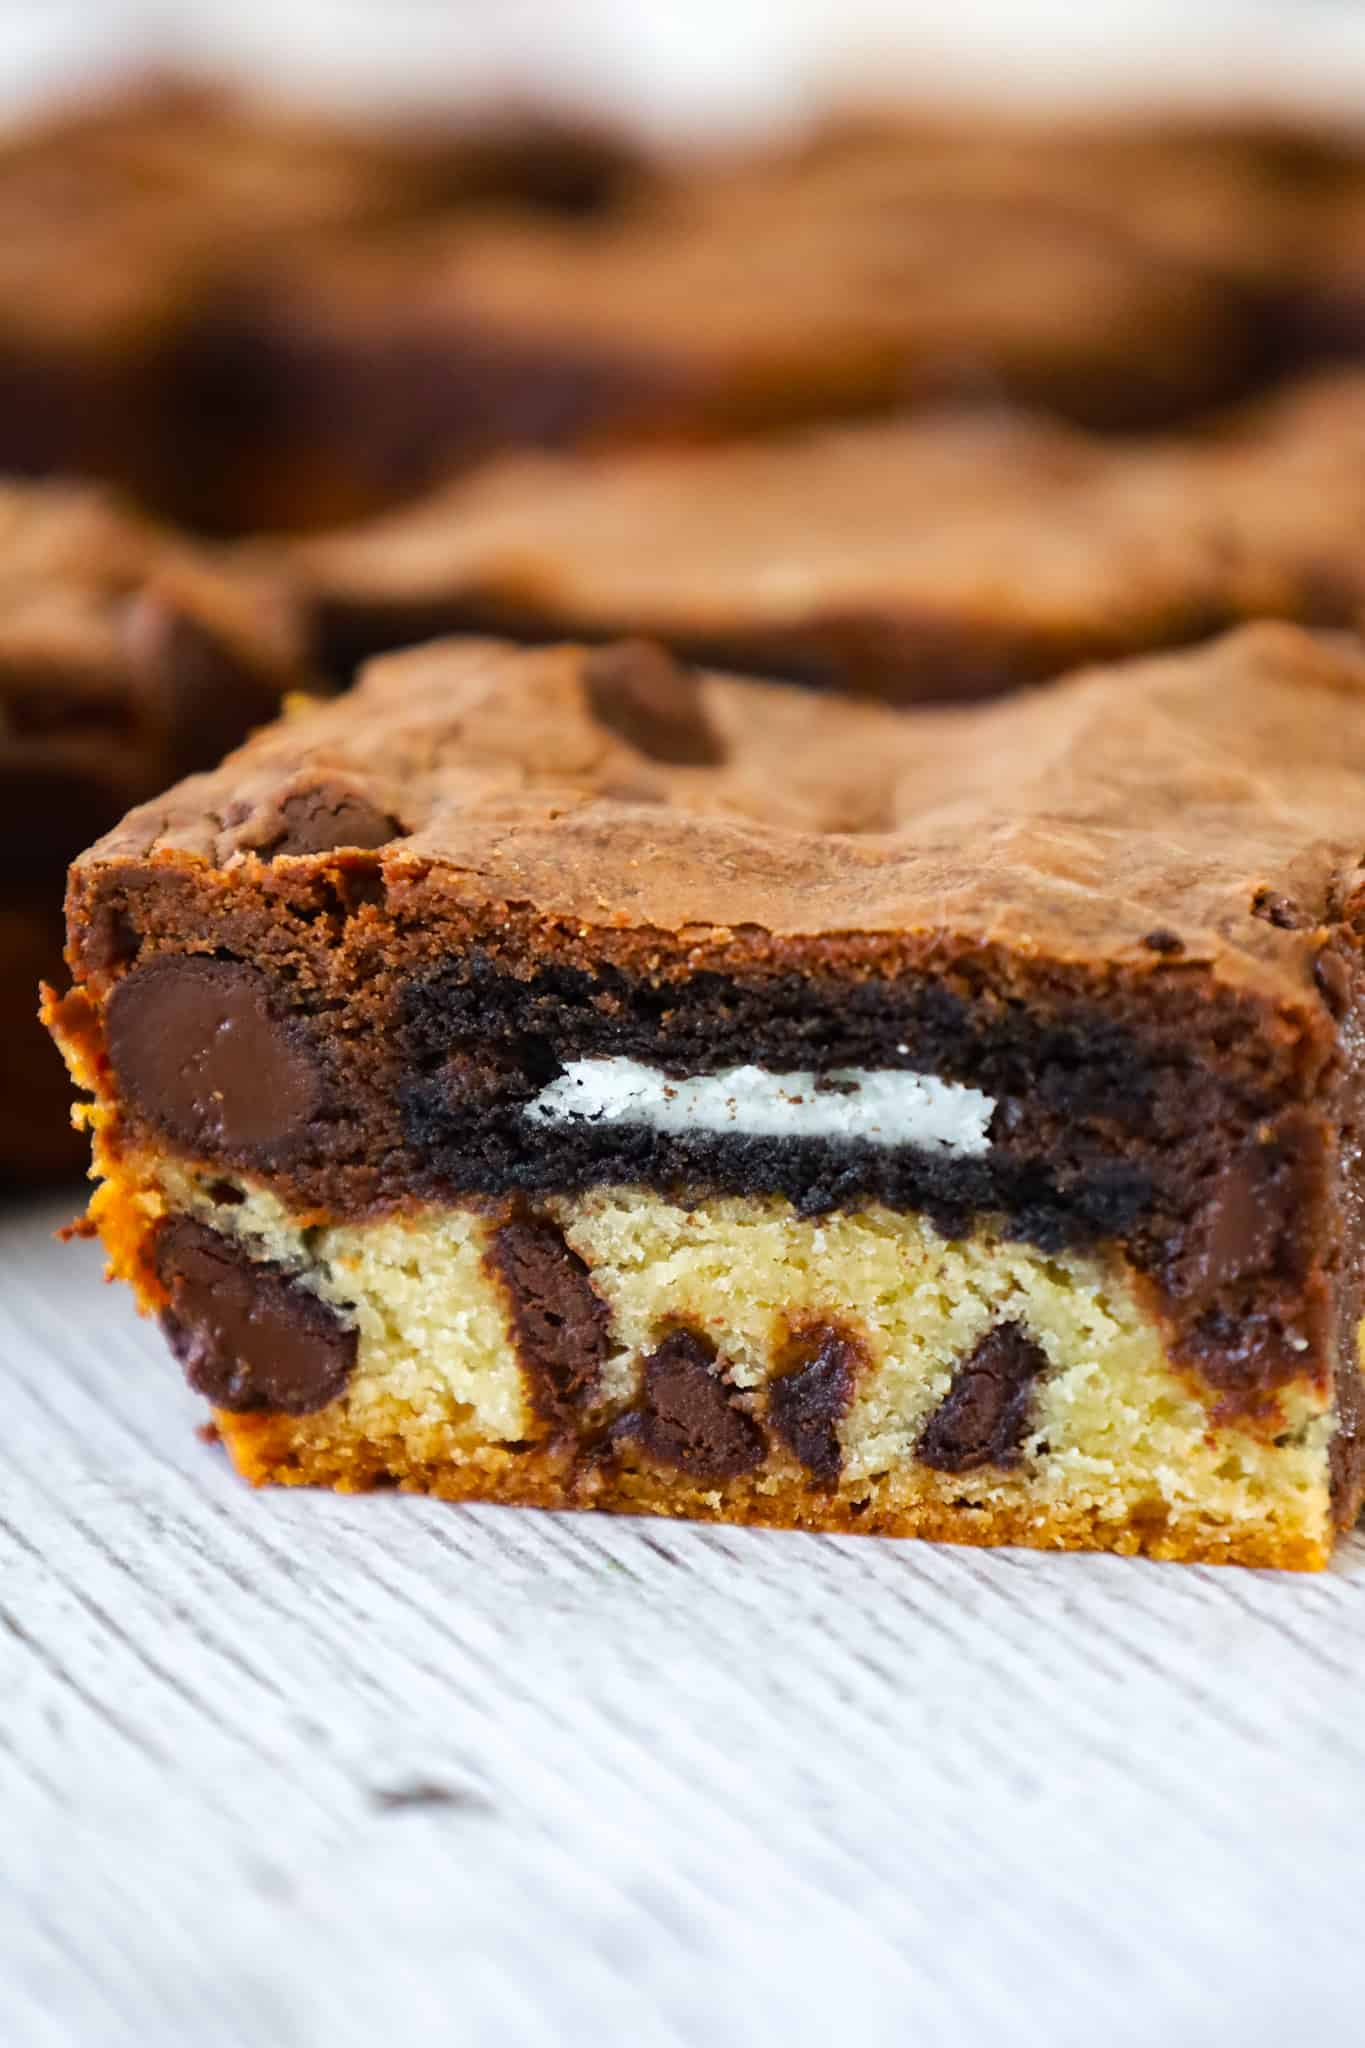 Slutty Brownies are delicious triple layer brownies with a chocolate chip cookie base, Oreo middle and chocolate brownie batter on top.